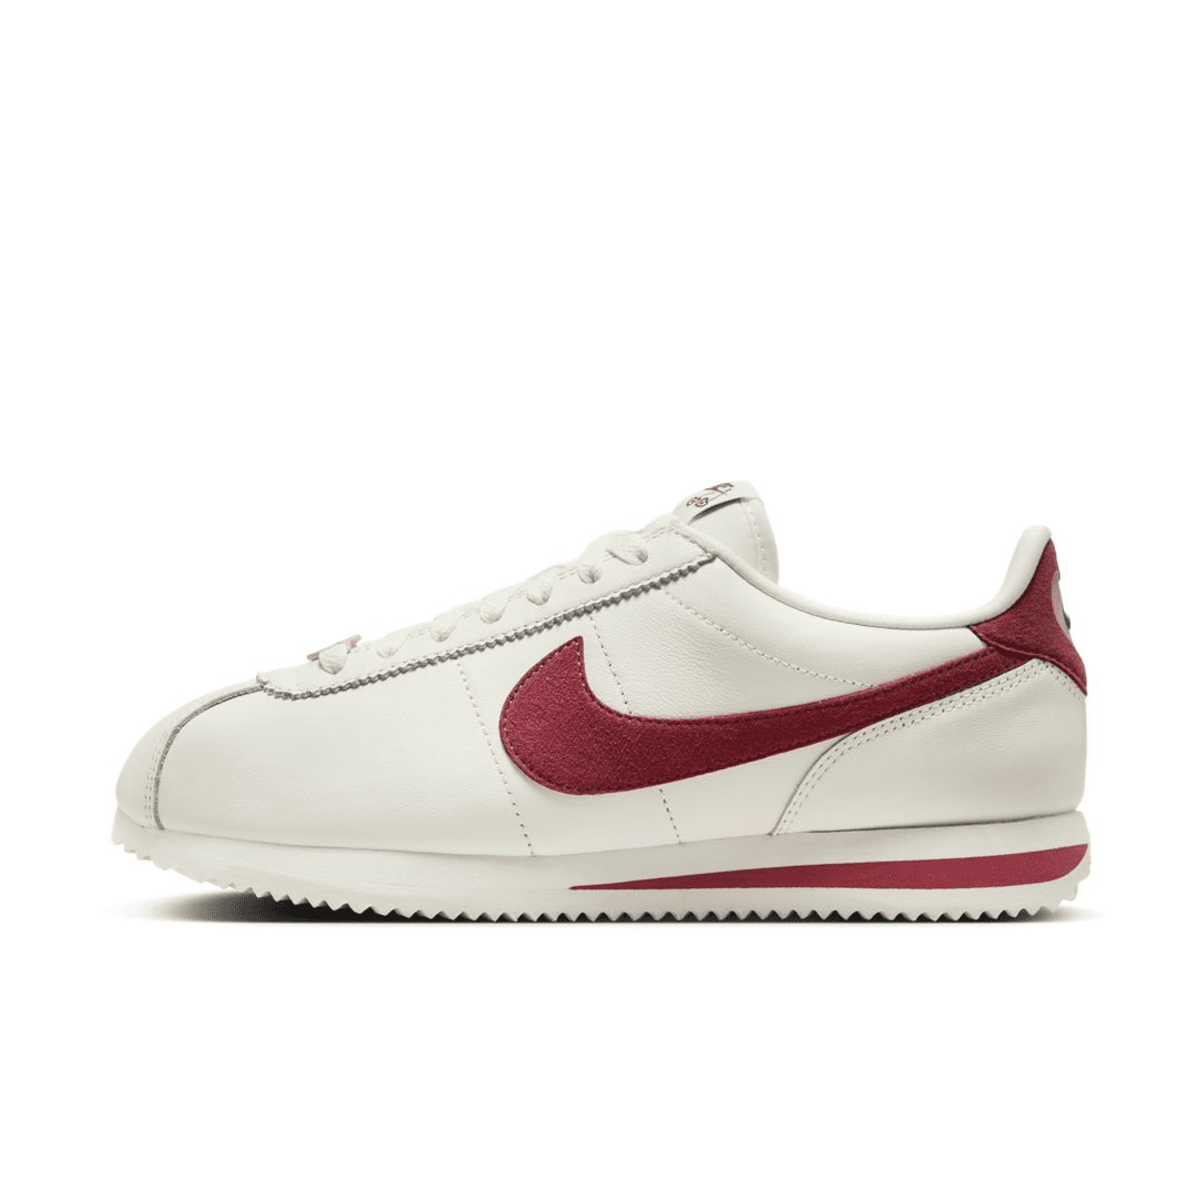 Official Look At The Nike Cortez “Valentine’s Day”